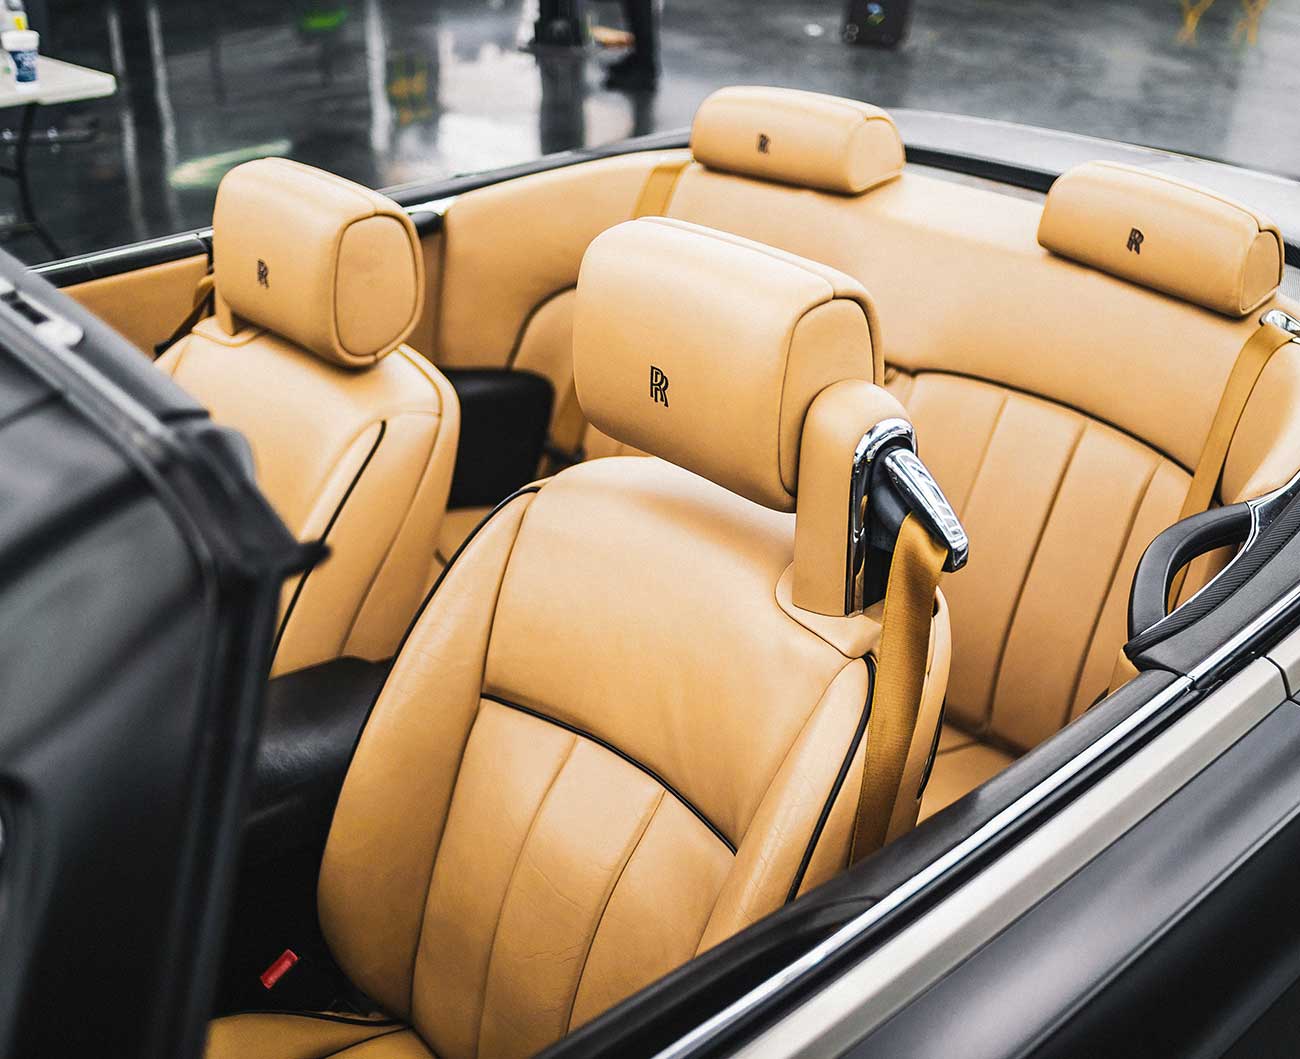 Leather Car Equipment And Interior That Make Convertibles Today Very Cheek